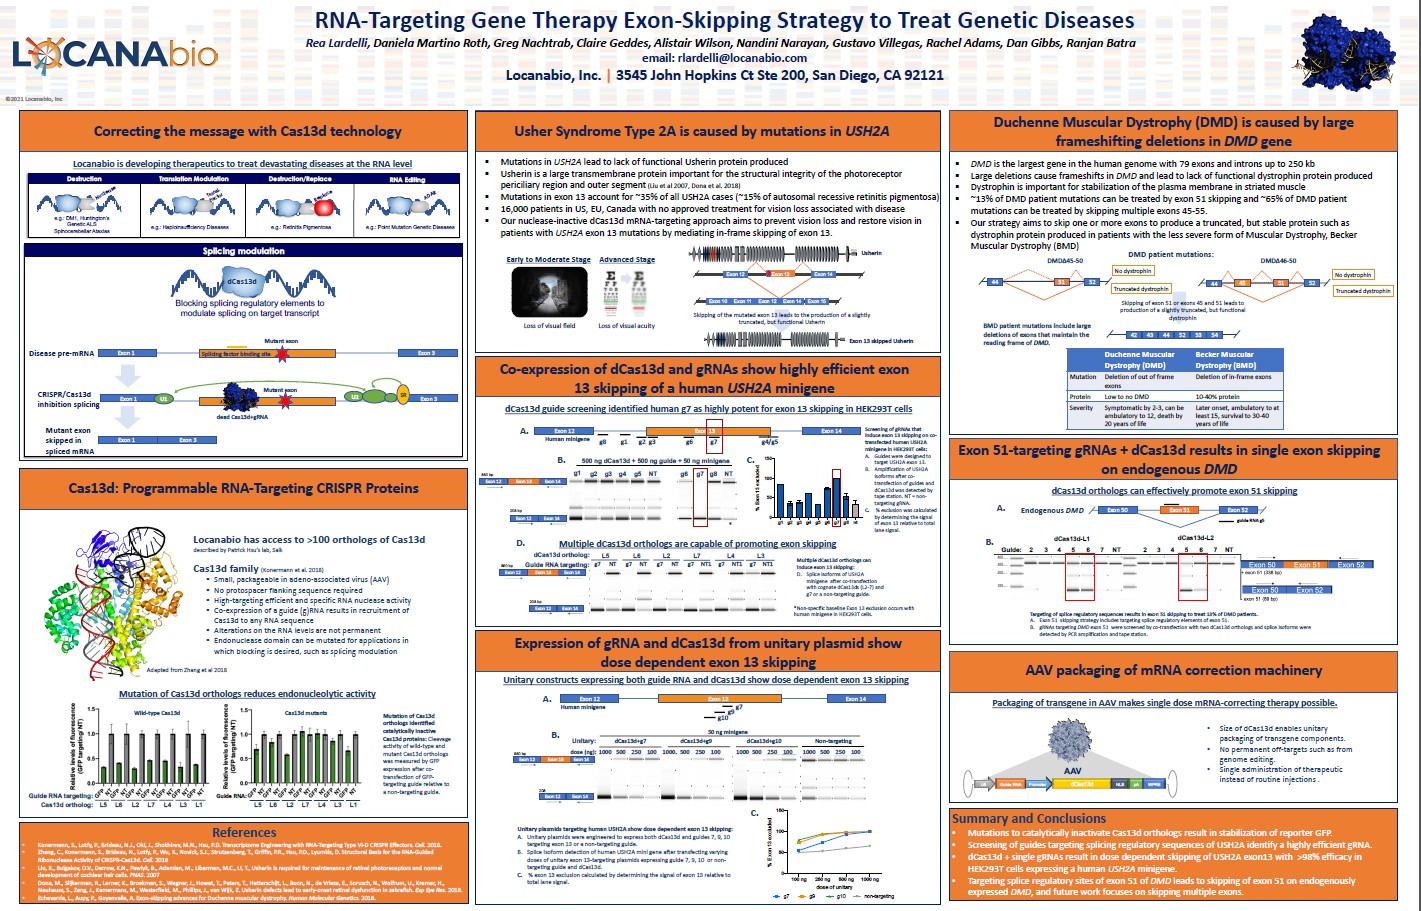 Poster: RNA-Targeting Gene Therapy Exon-Skipping Strategy to Treat Genetic Diseases